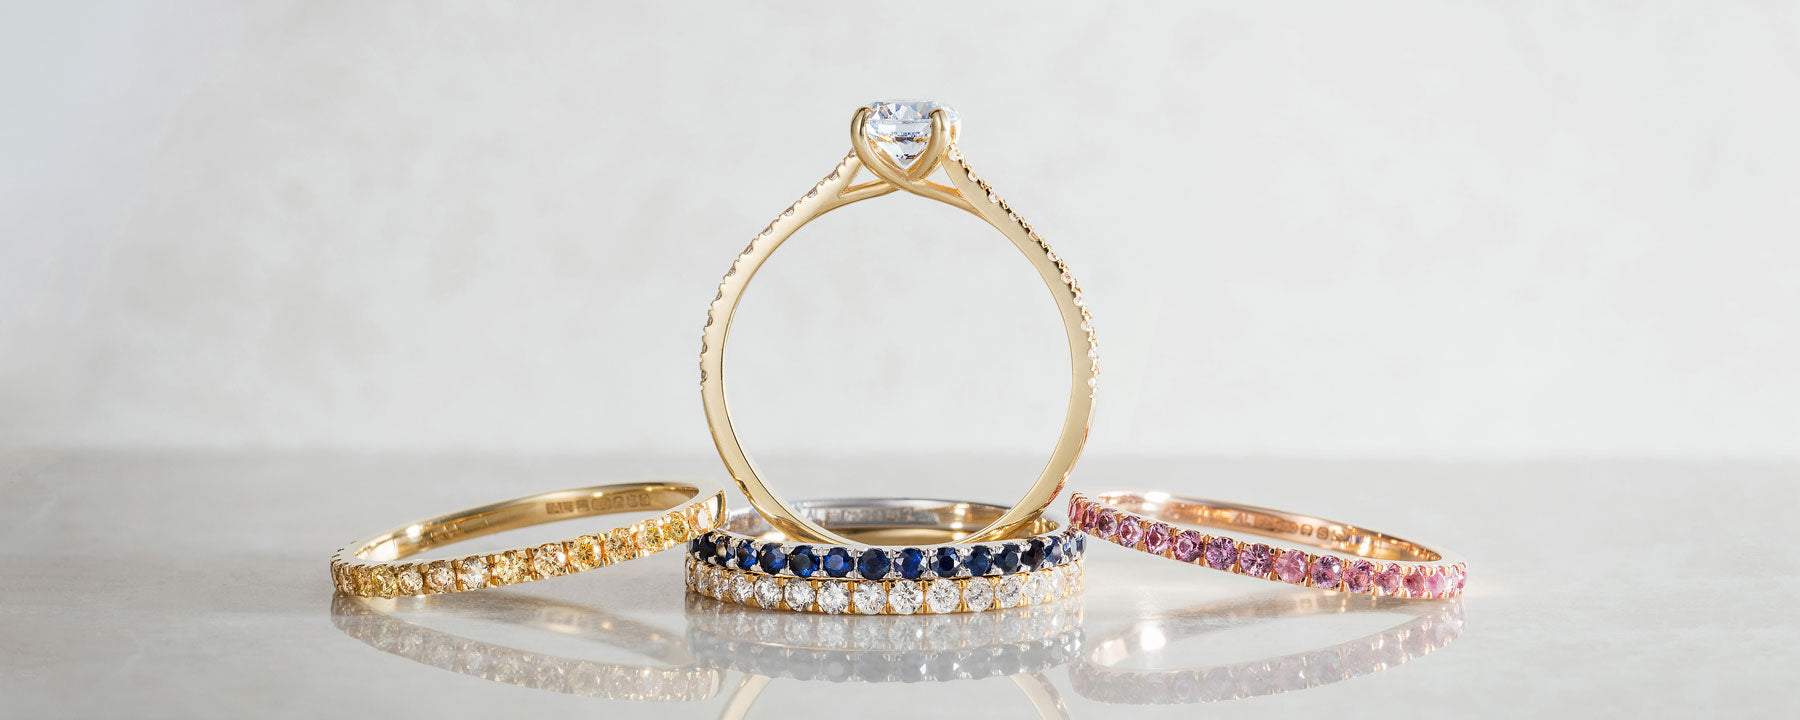 A selection of modern classic microset wedding bands and engagement rings from our sparkling Altair collection